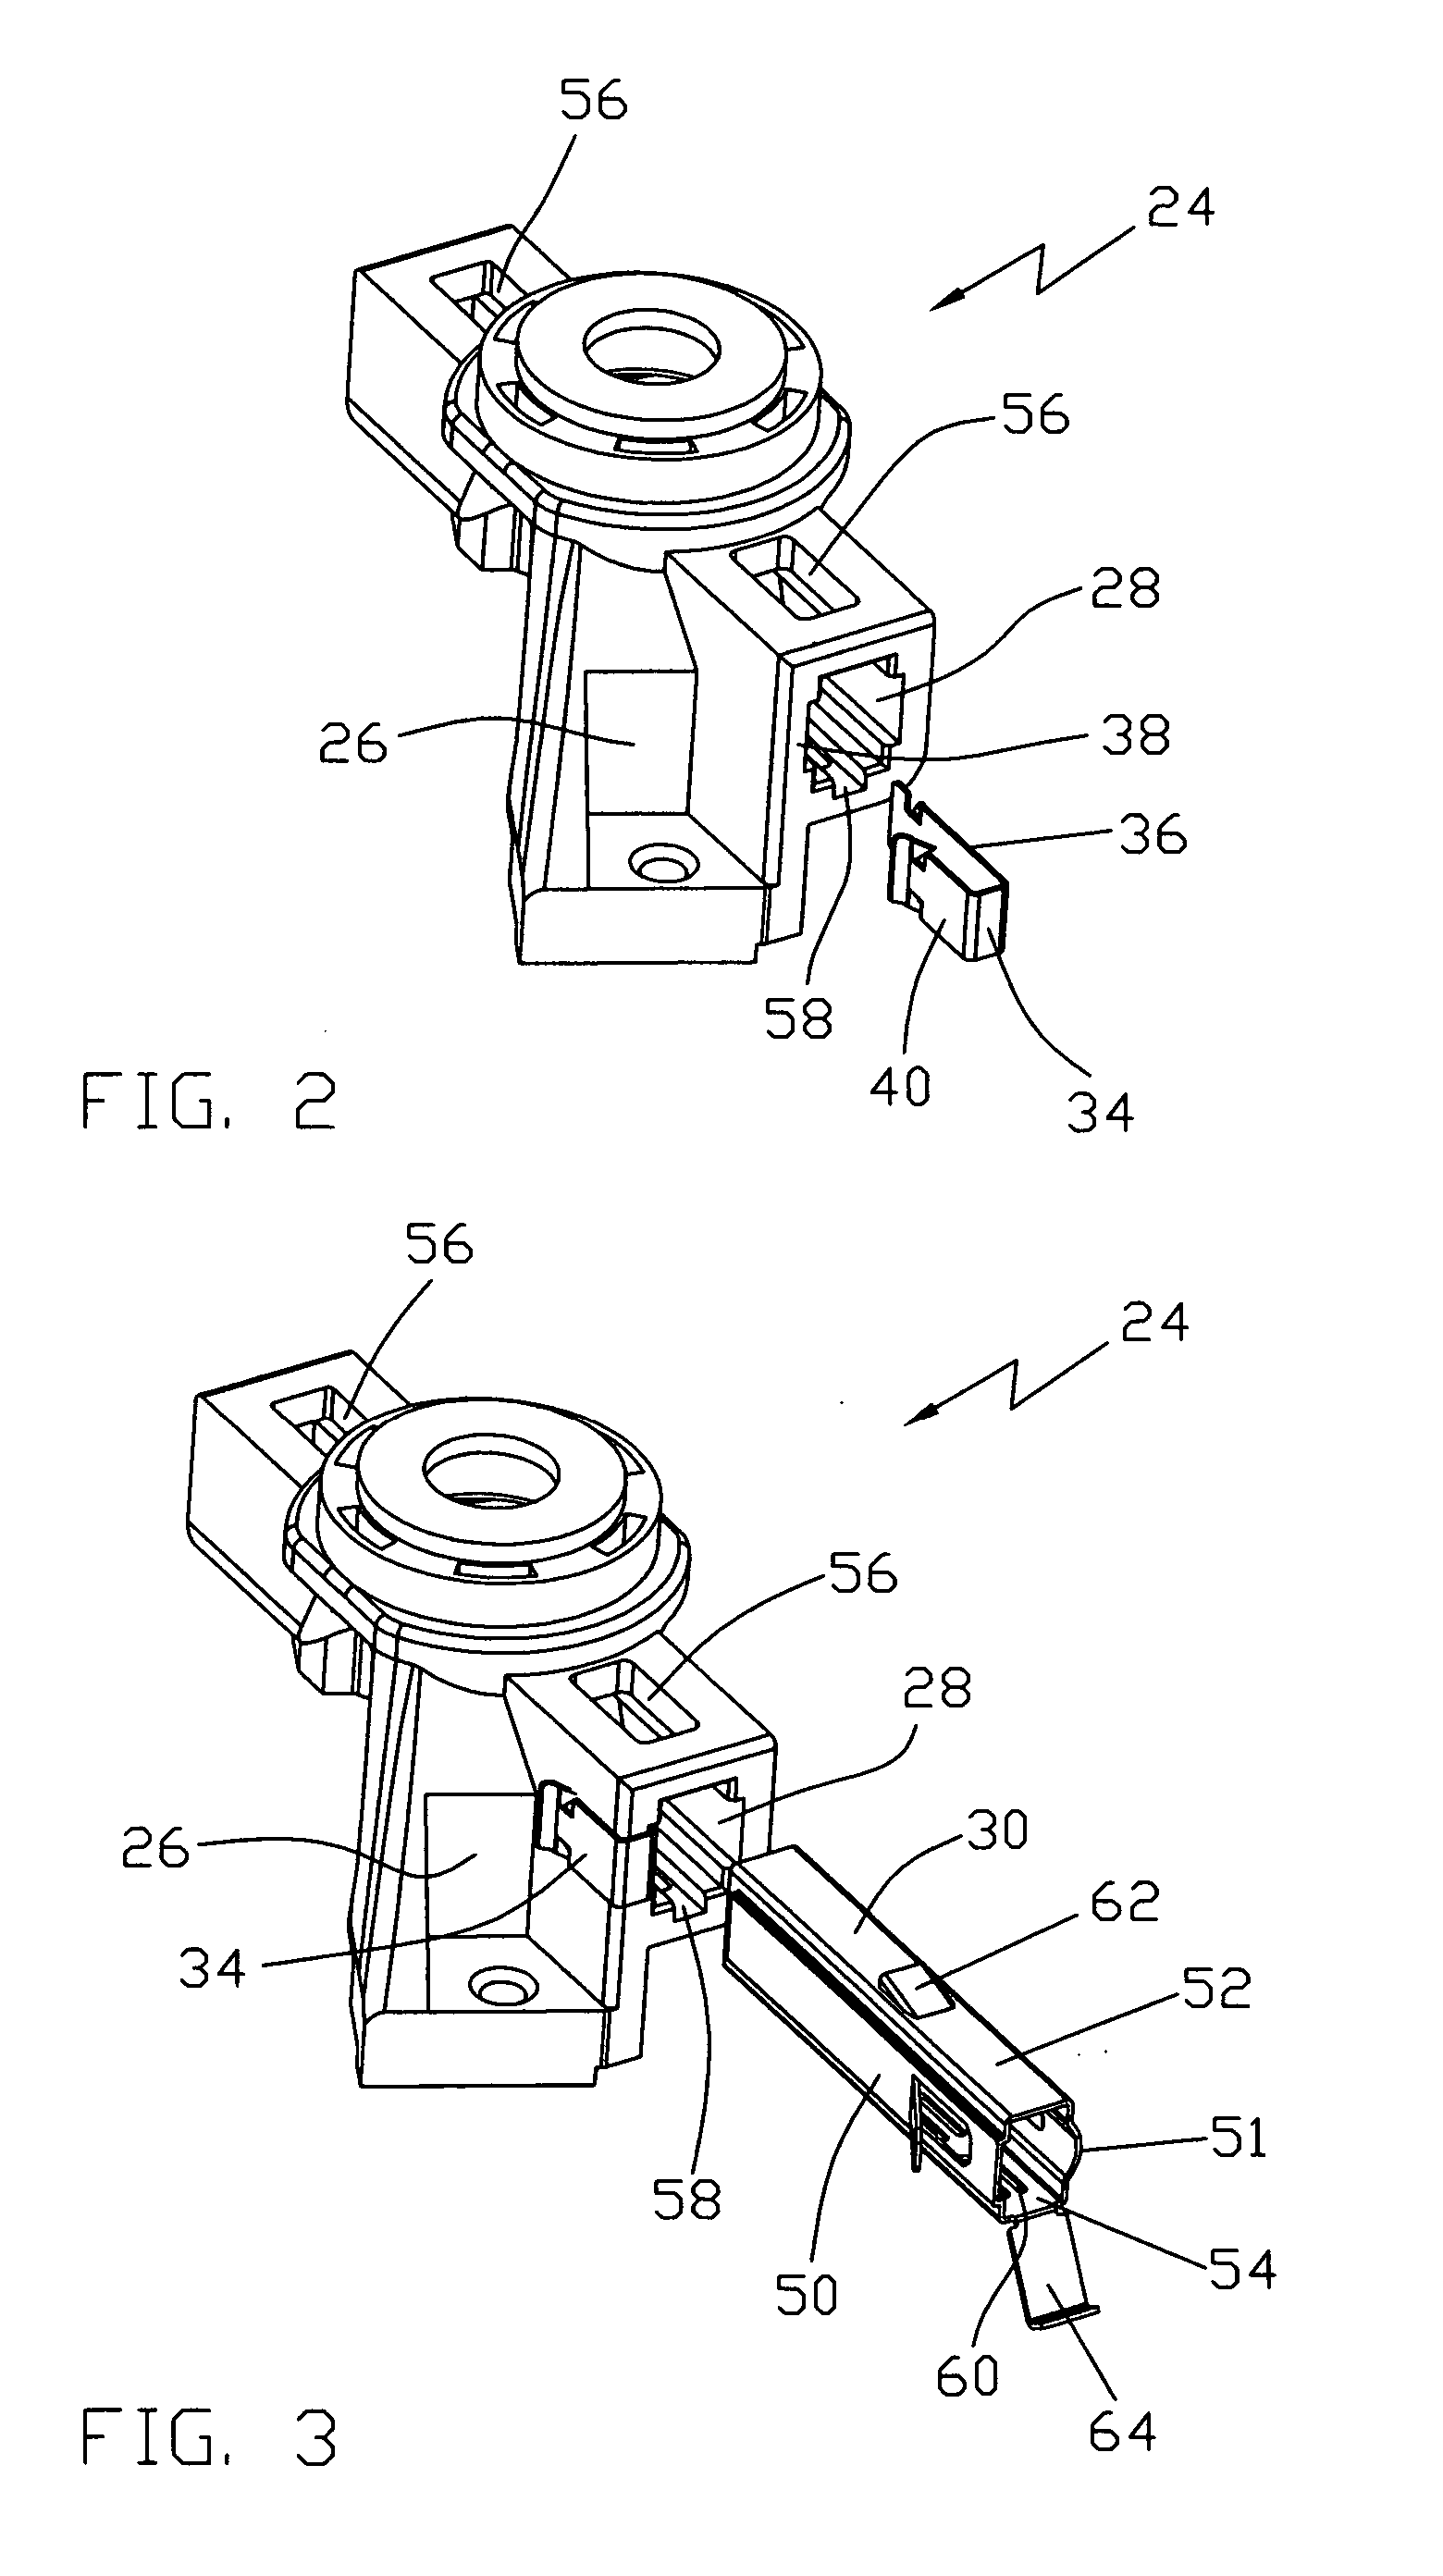 Brush holder assembly for an electric motor